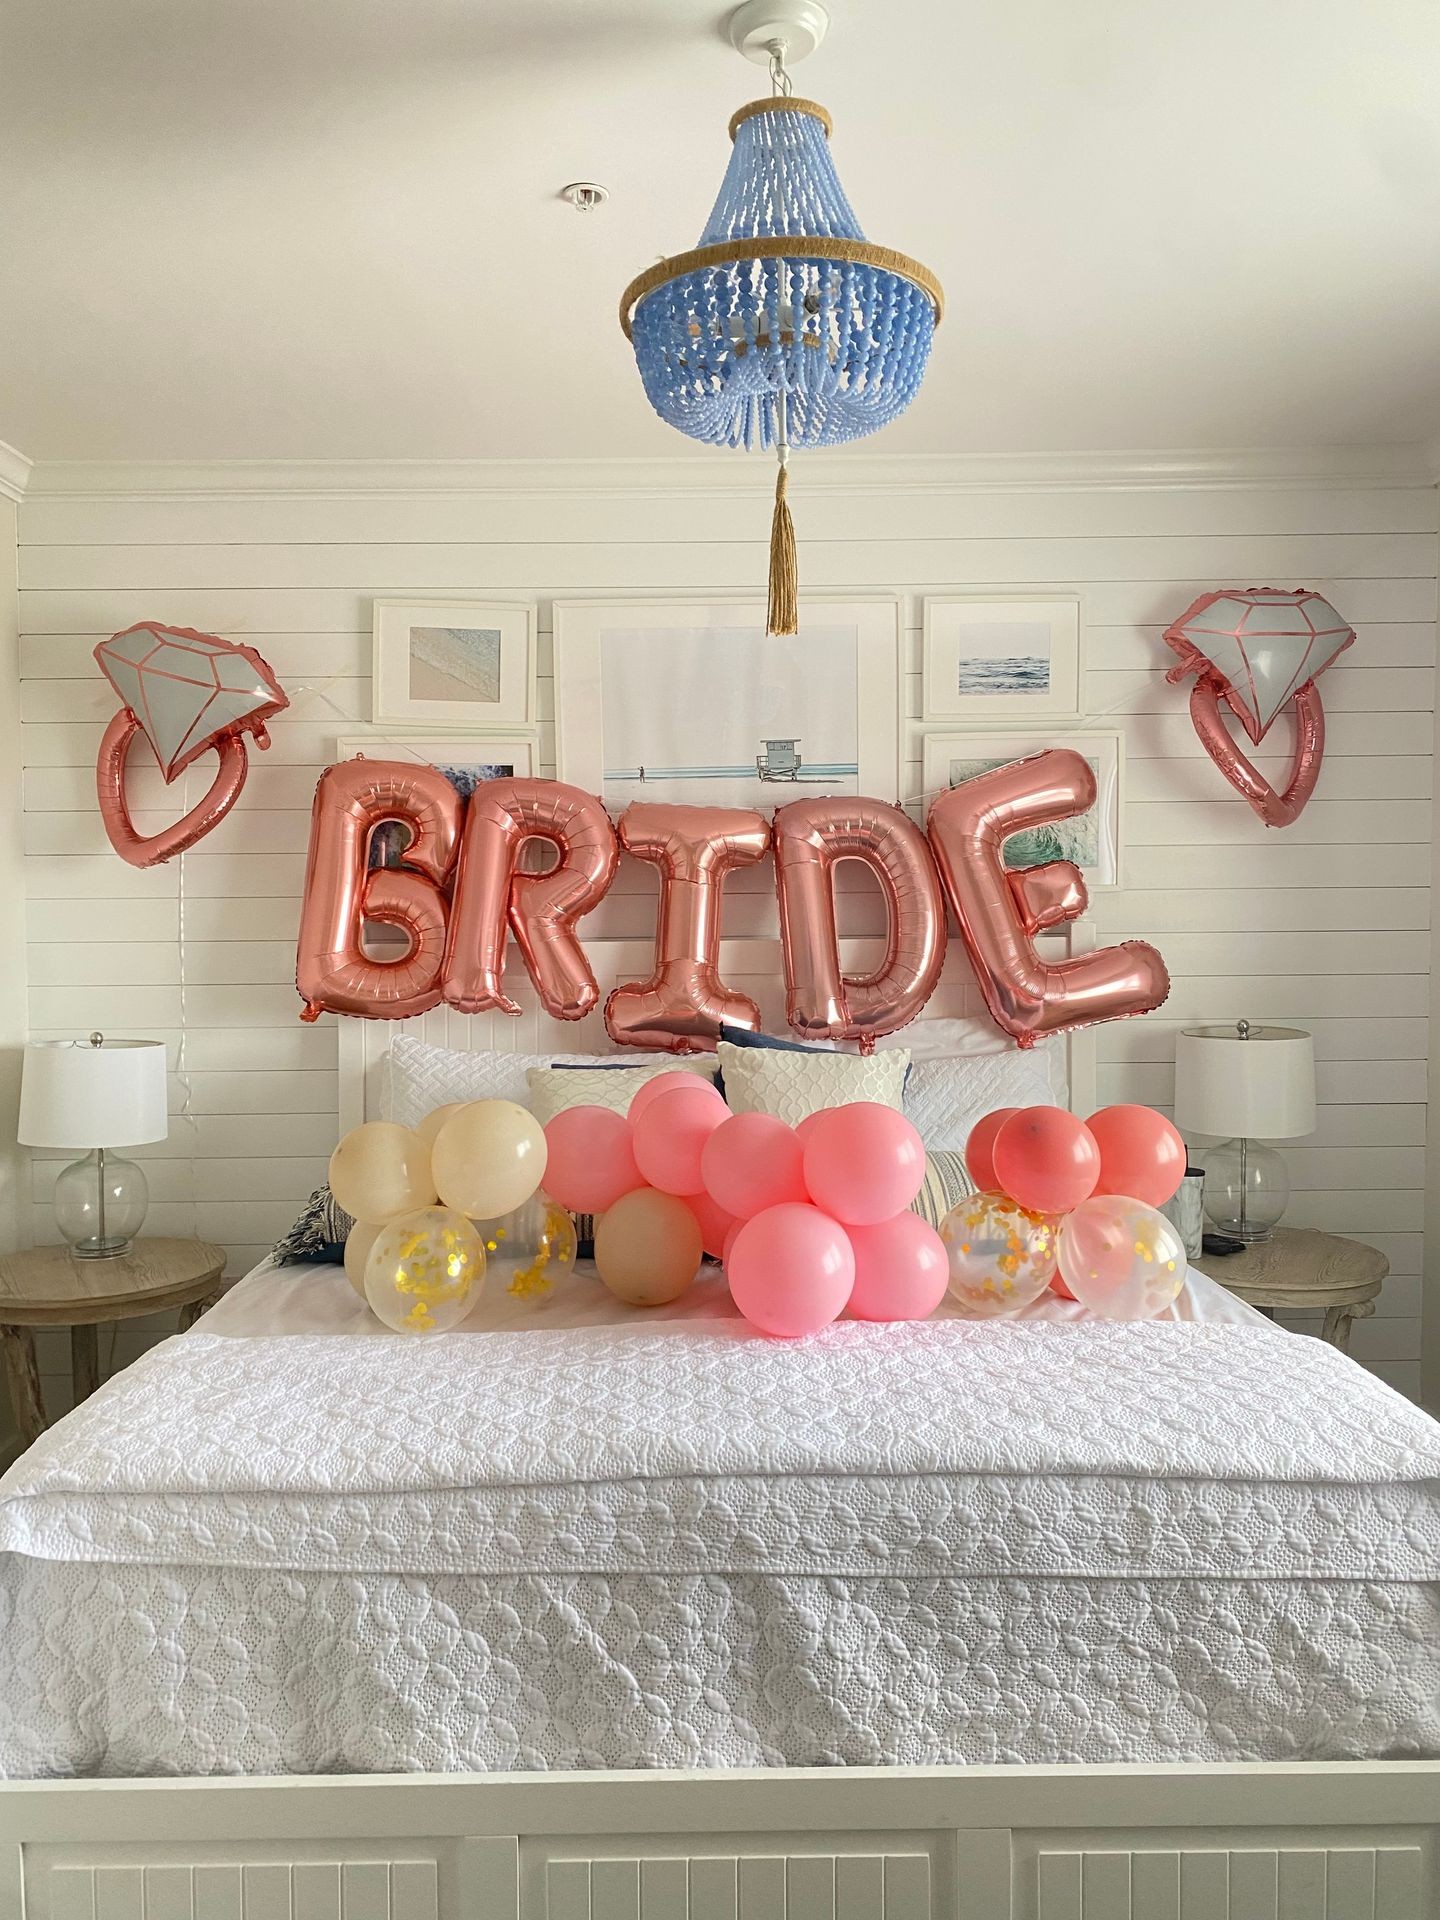 Bachelorette party bridesmaids ocean city maryland balloons bride to be maid of honor